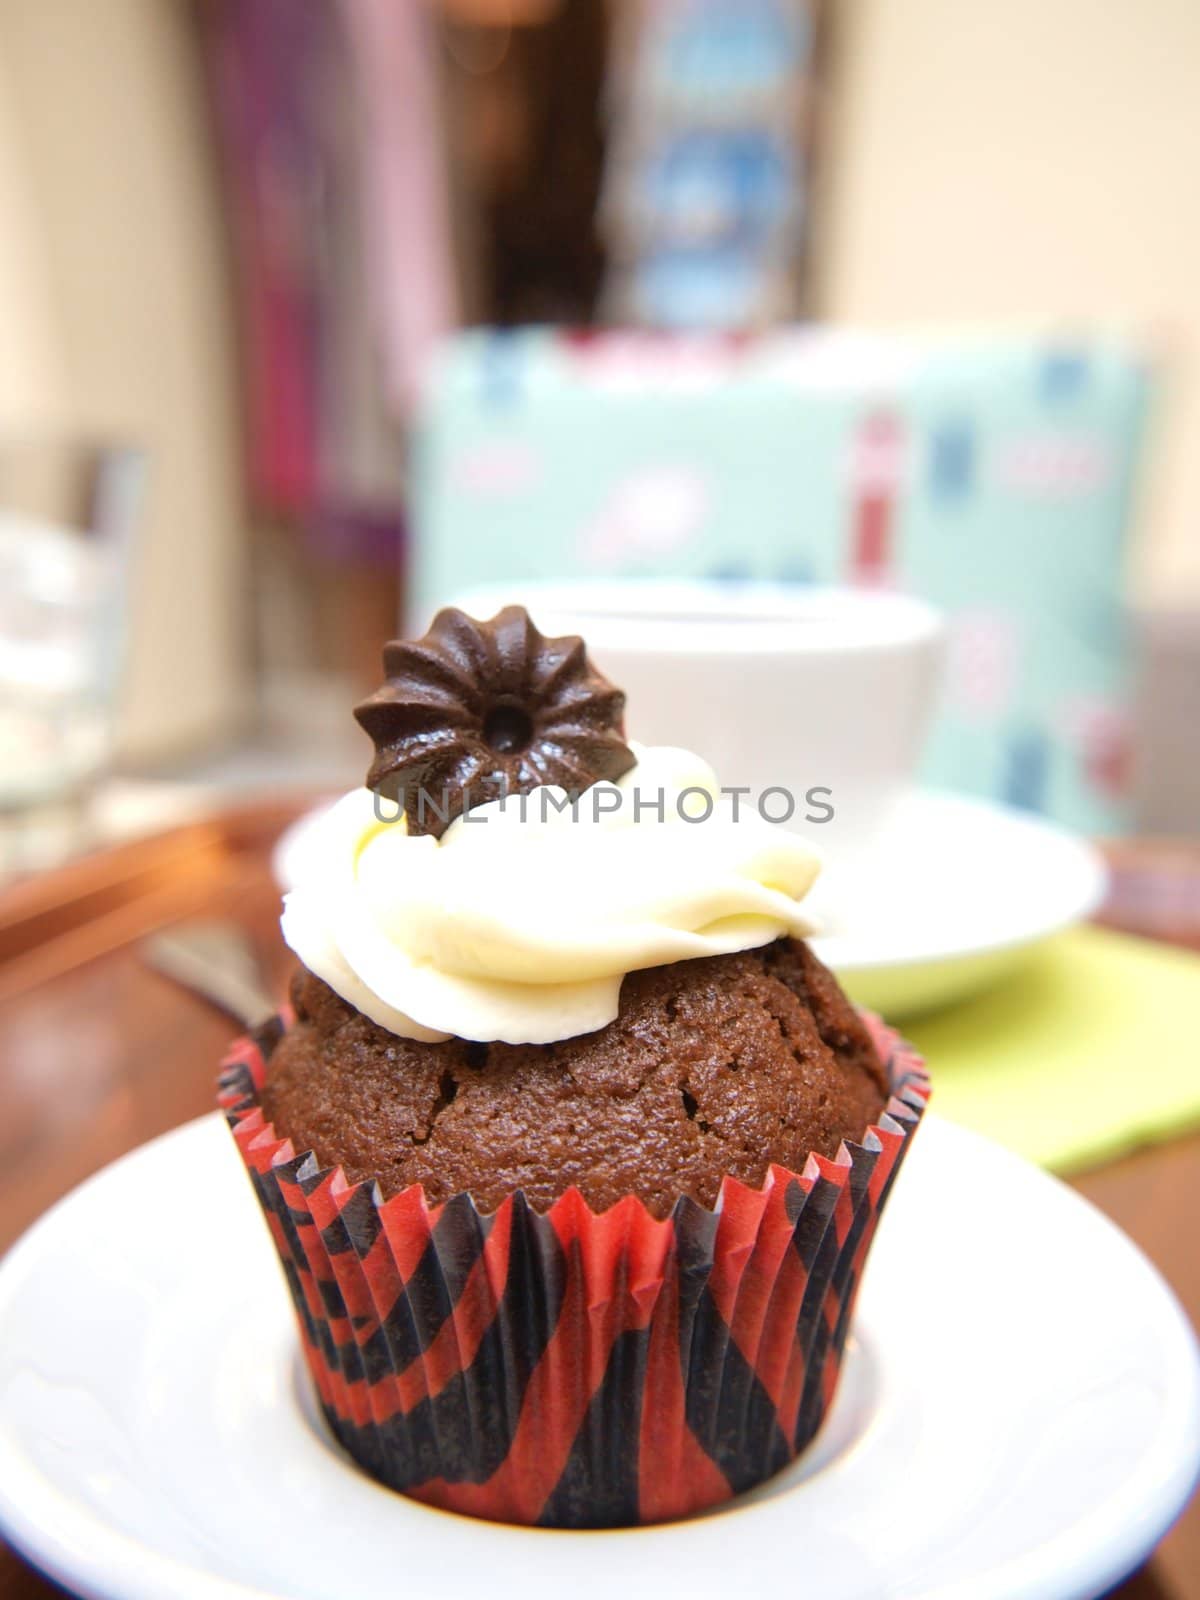 Closeip of chocolate muffin with icing, on plate